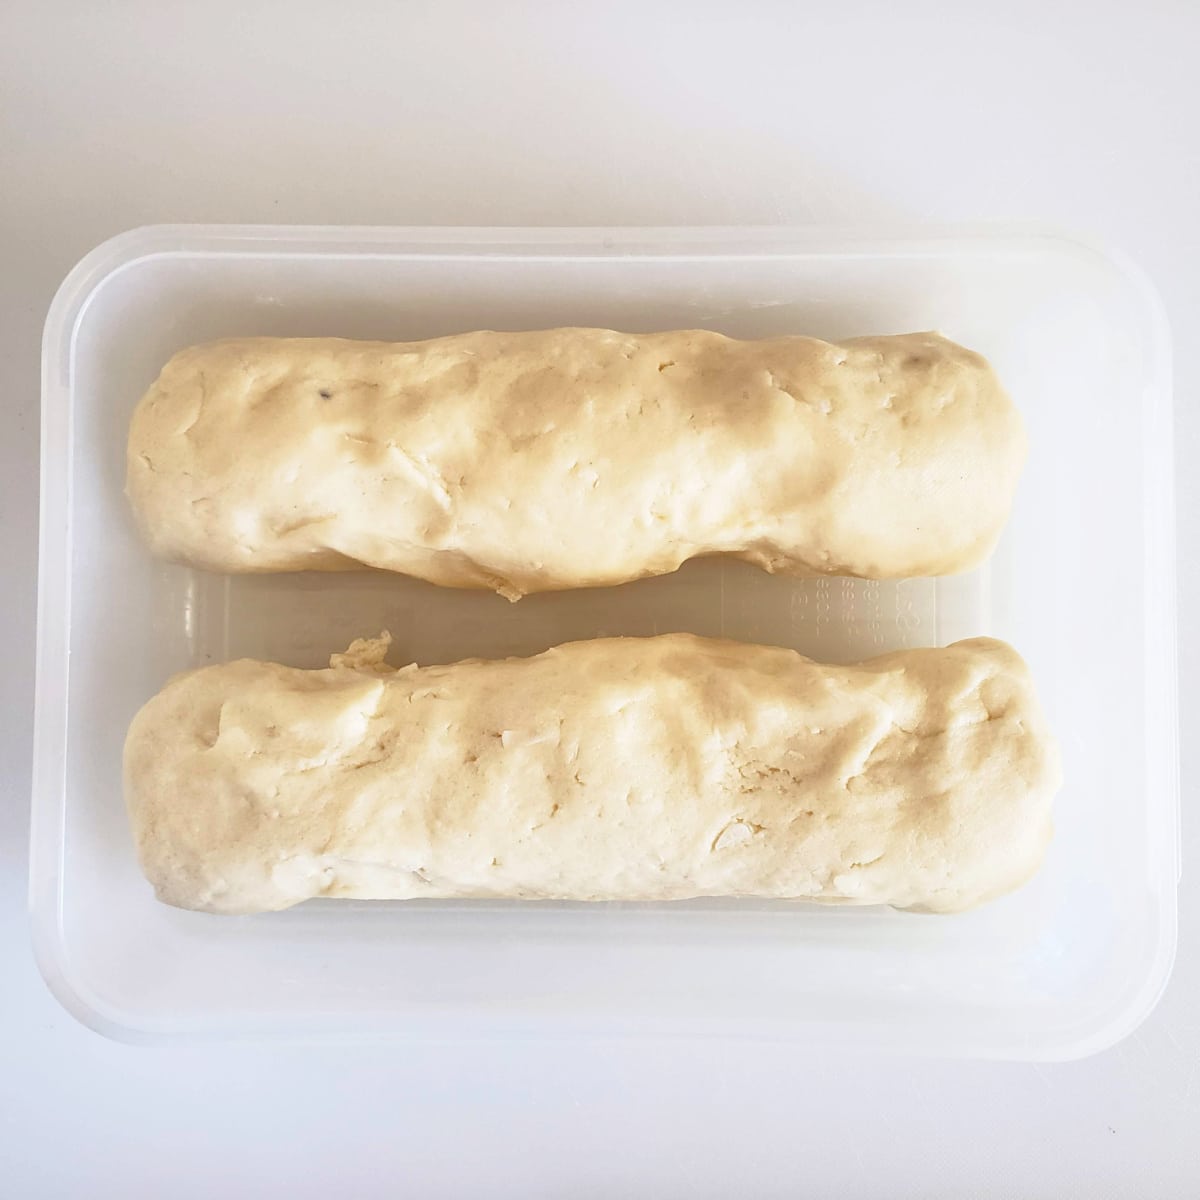 2 dough logs in a plastic container on a white cutting board